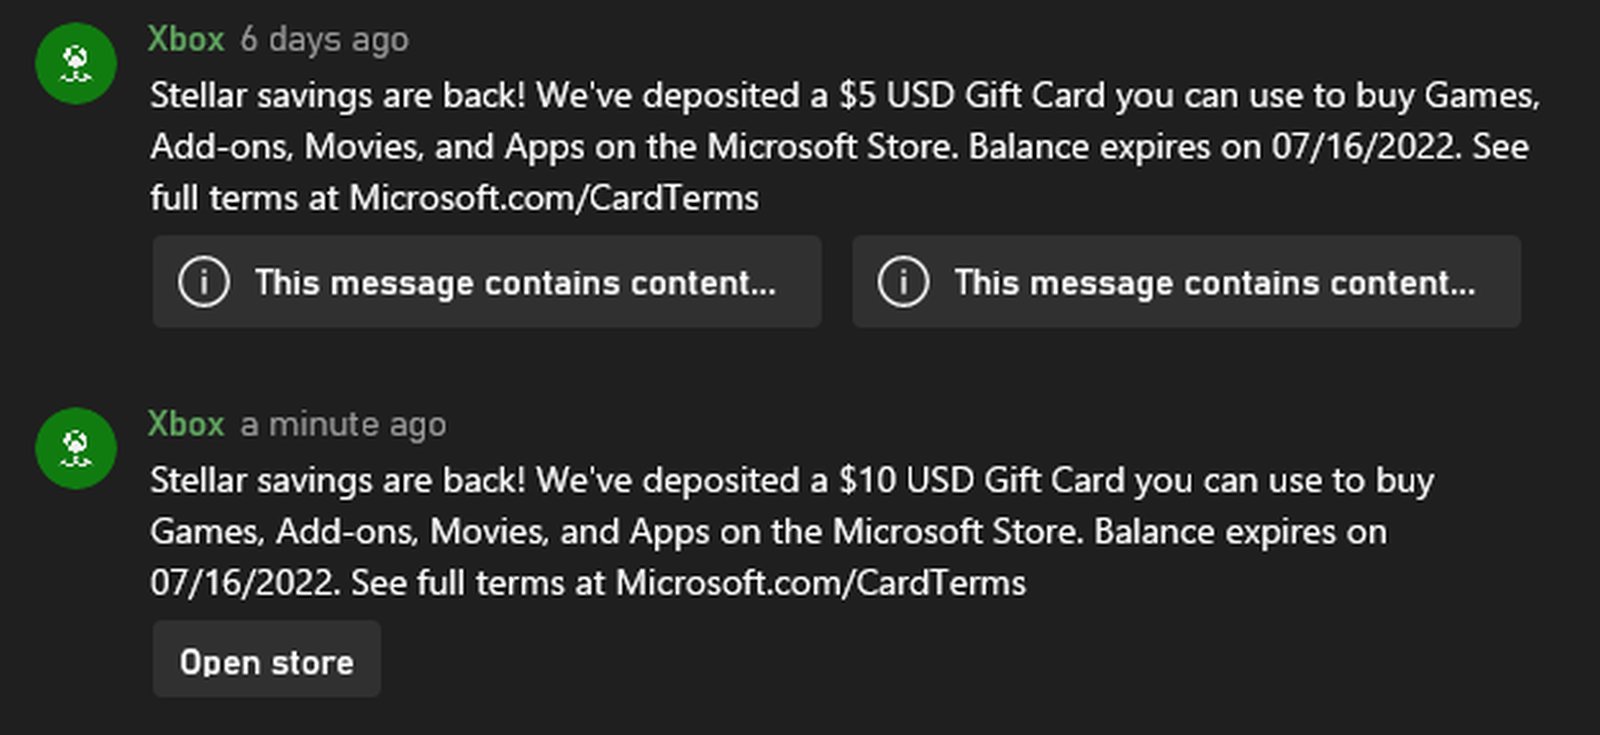 Wario64 on Twitter: "Check your Xbox messages again. Microsoft sent out  another free gift card, $10 this time on top of last week's gift card  https://t.co/VVvi9iKslI" / Twitter